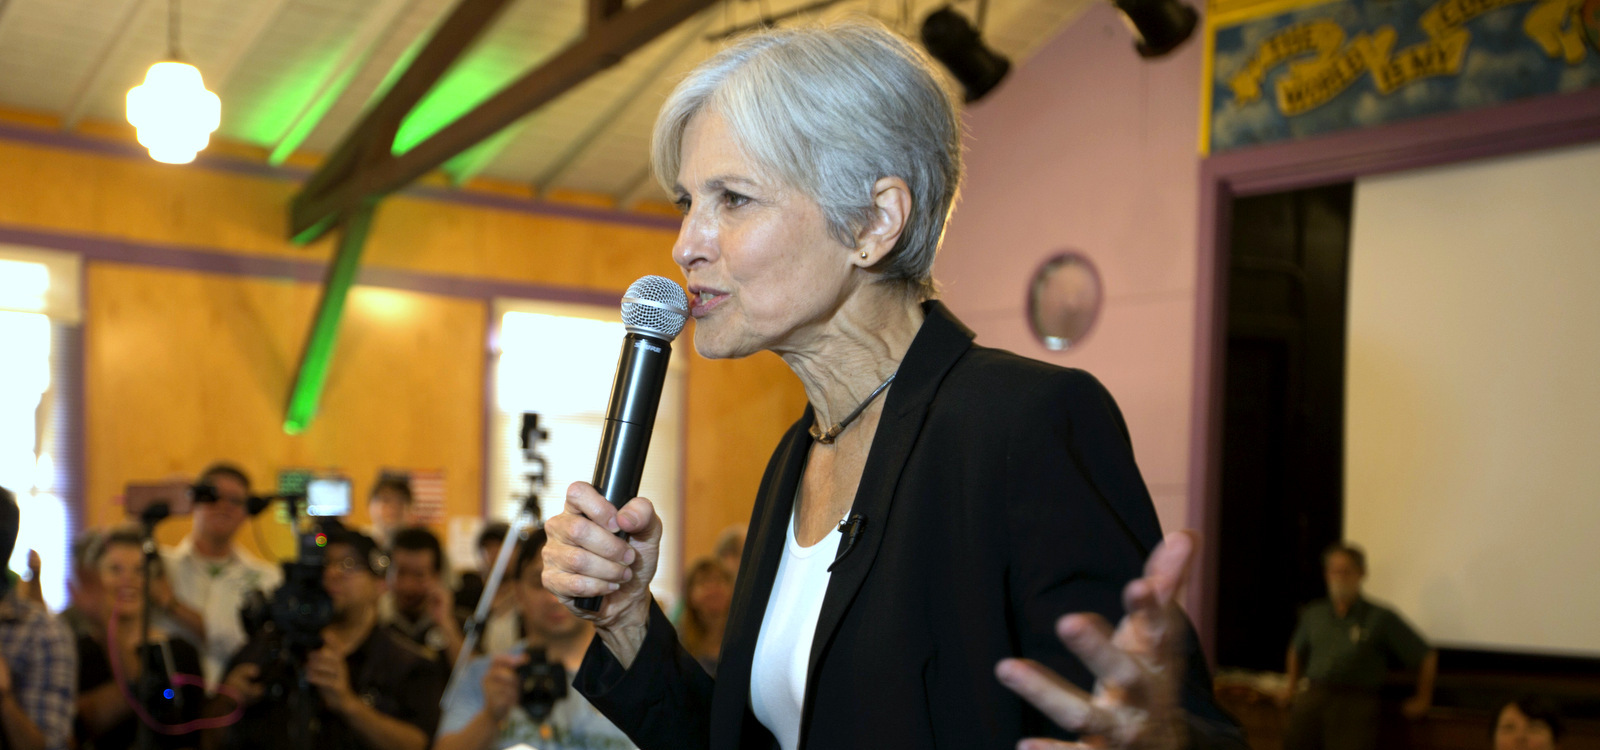 Green party presidential candidate Jill Stein delivers a stump speech to her supporters during a campaign stop at Humanist Hall in Oakland, Calif. on Thursday, Oct. 6, 2016. (AP Photo/D. Ross Cameron)